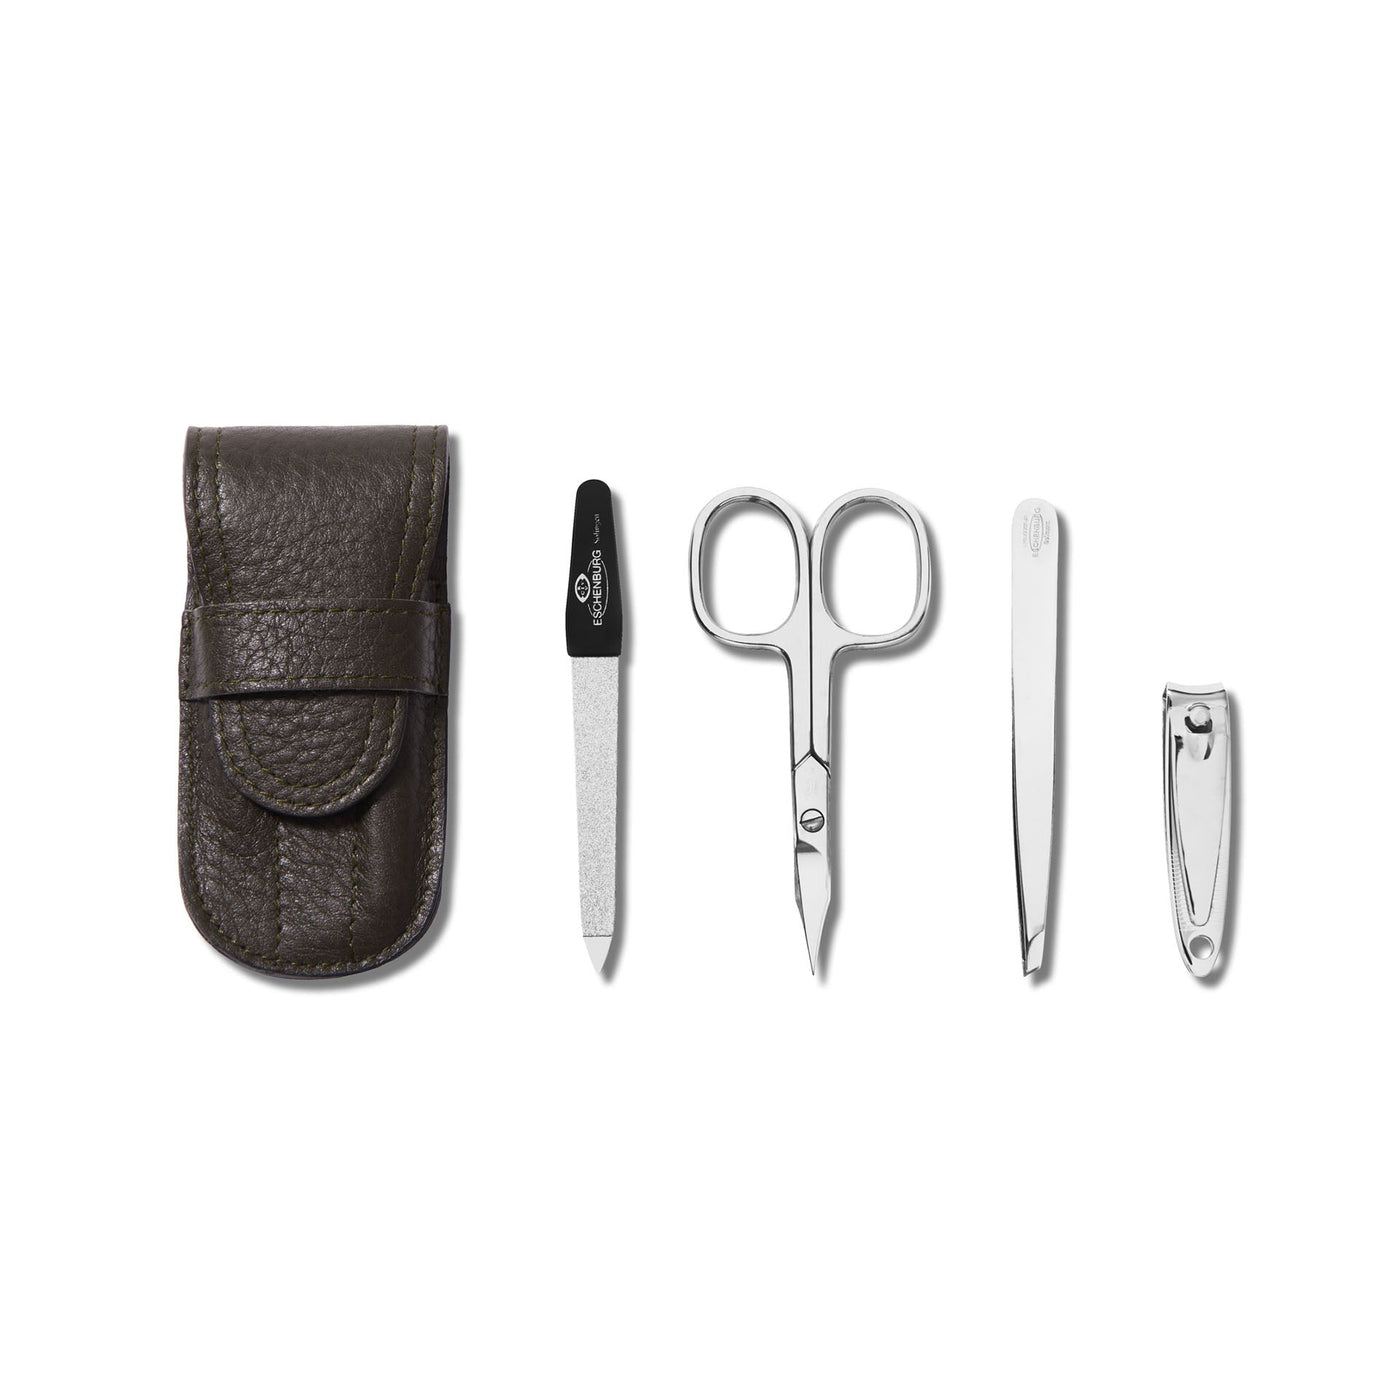 Nickleplated Personal Grooming Set with Leather Travel Holder - Olive